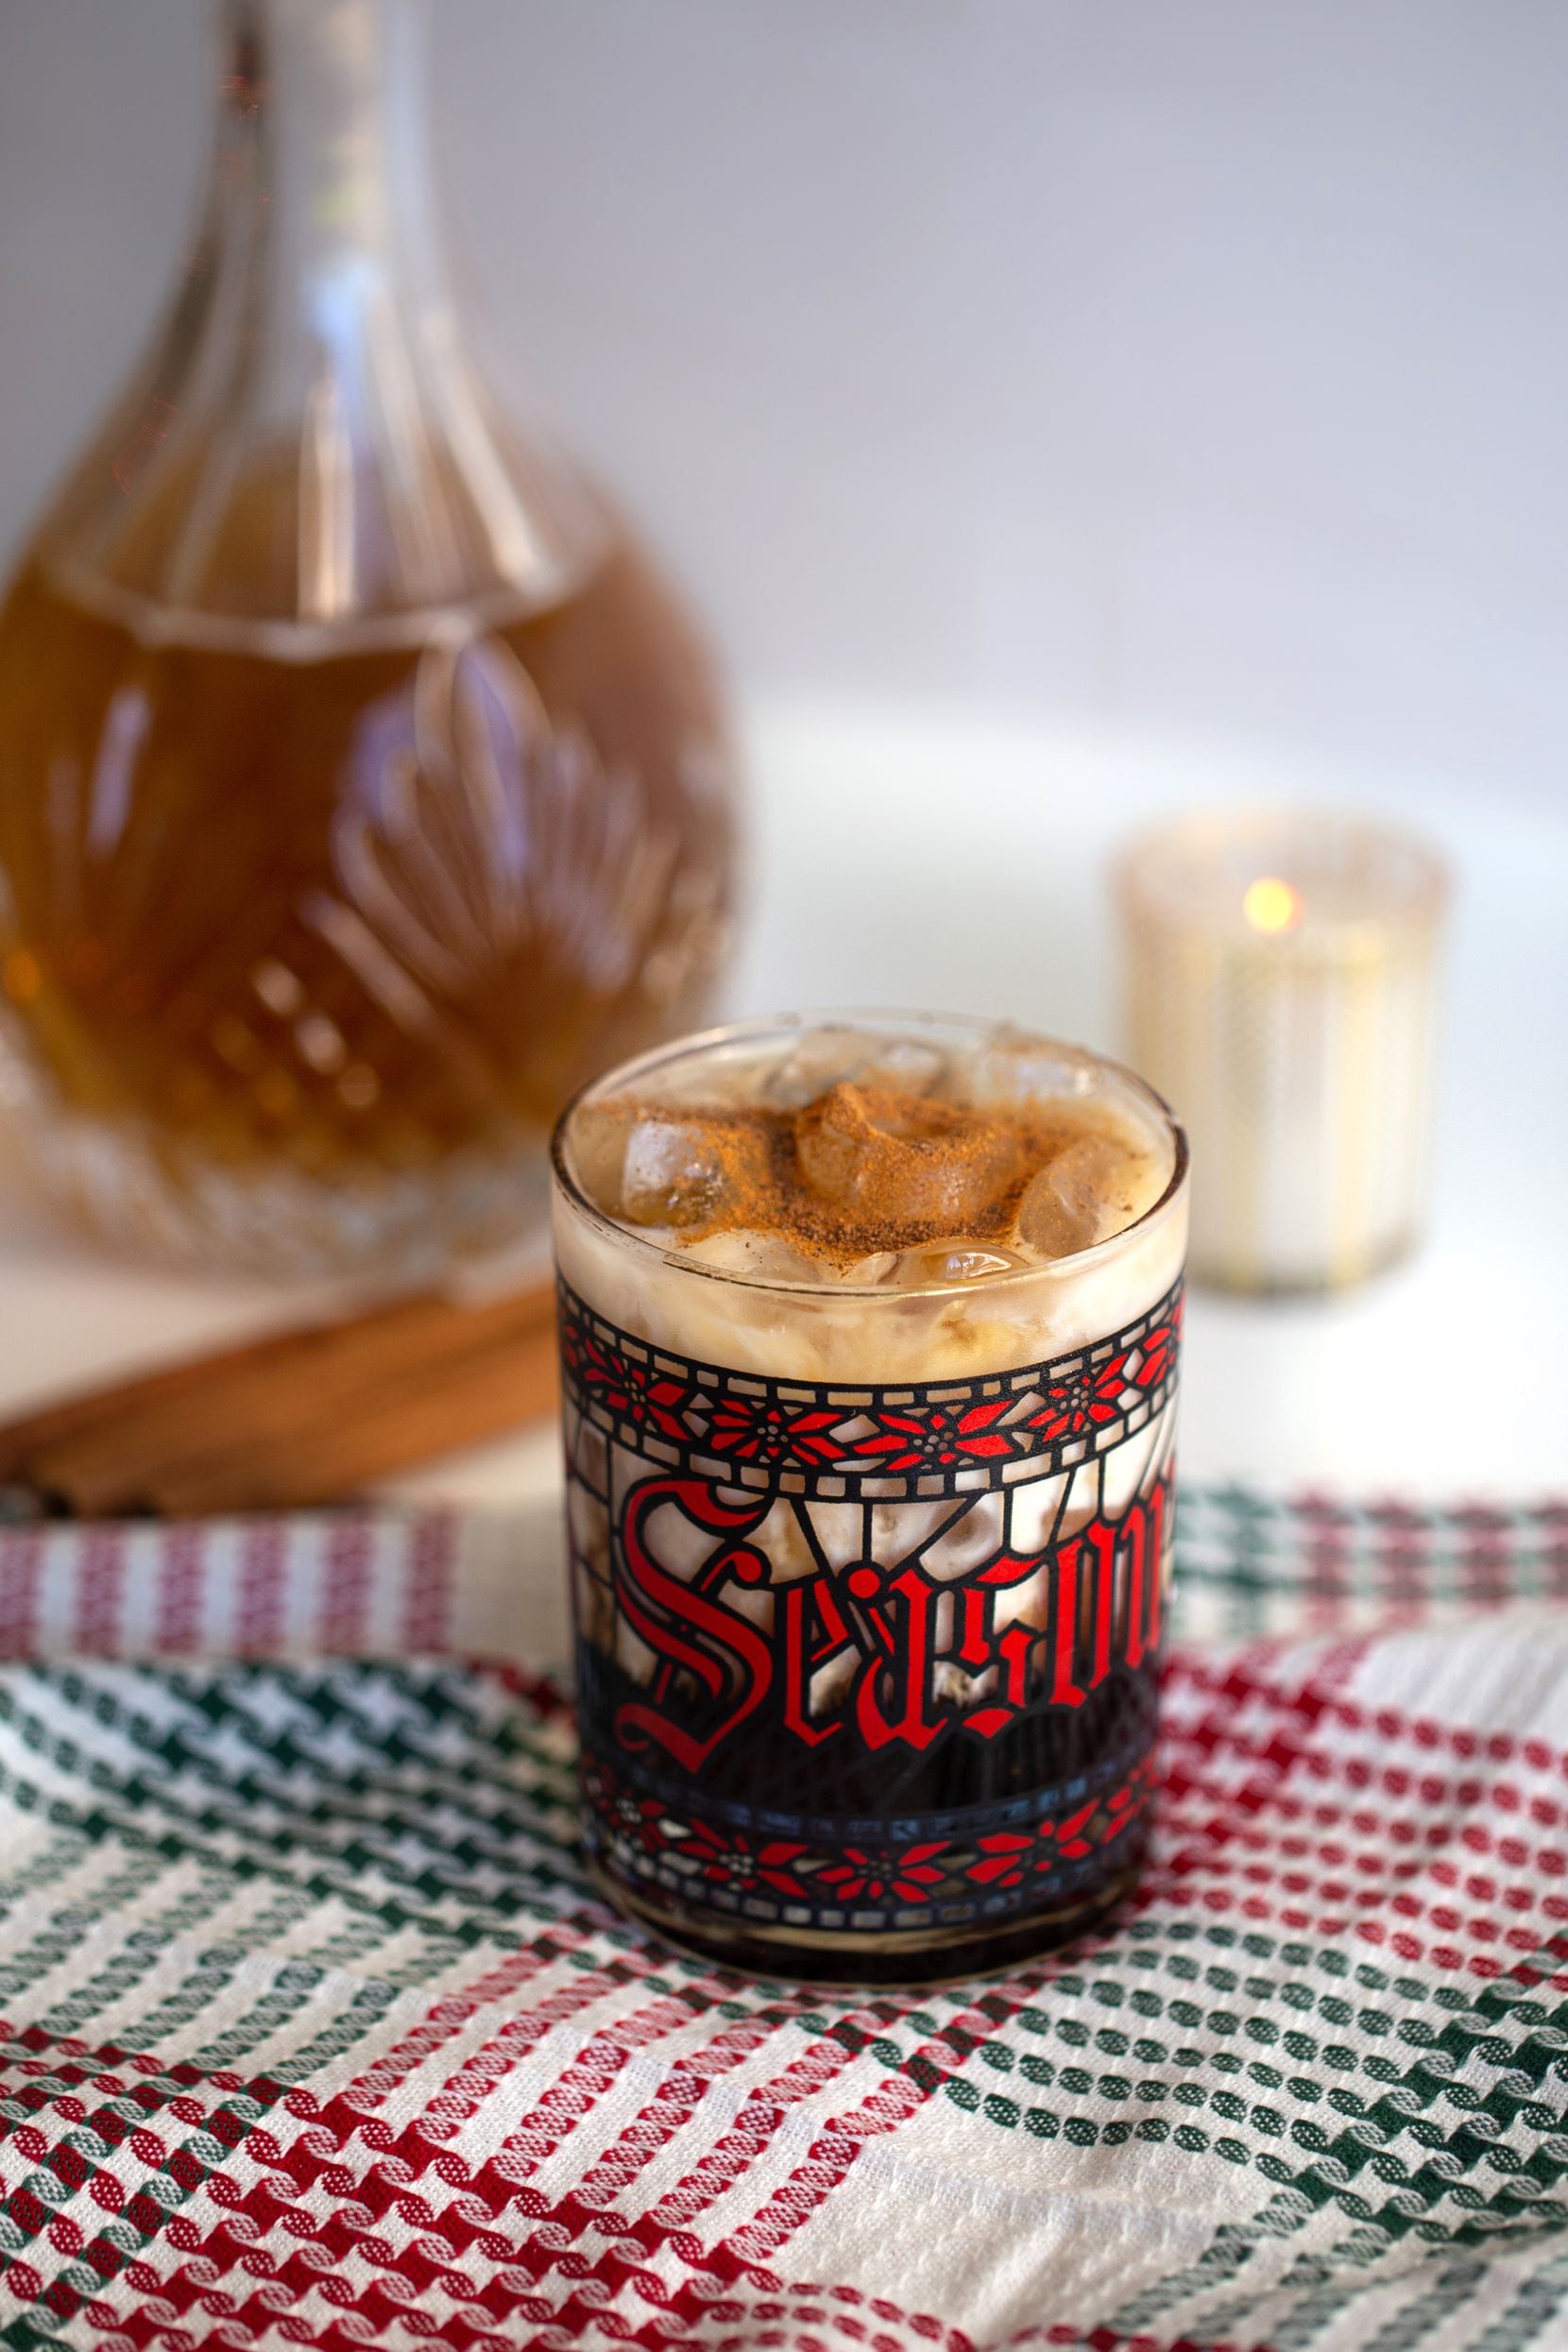 Gingerbread White Russian from Stephanie Welch of Thunderbird Station